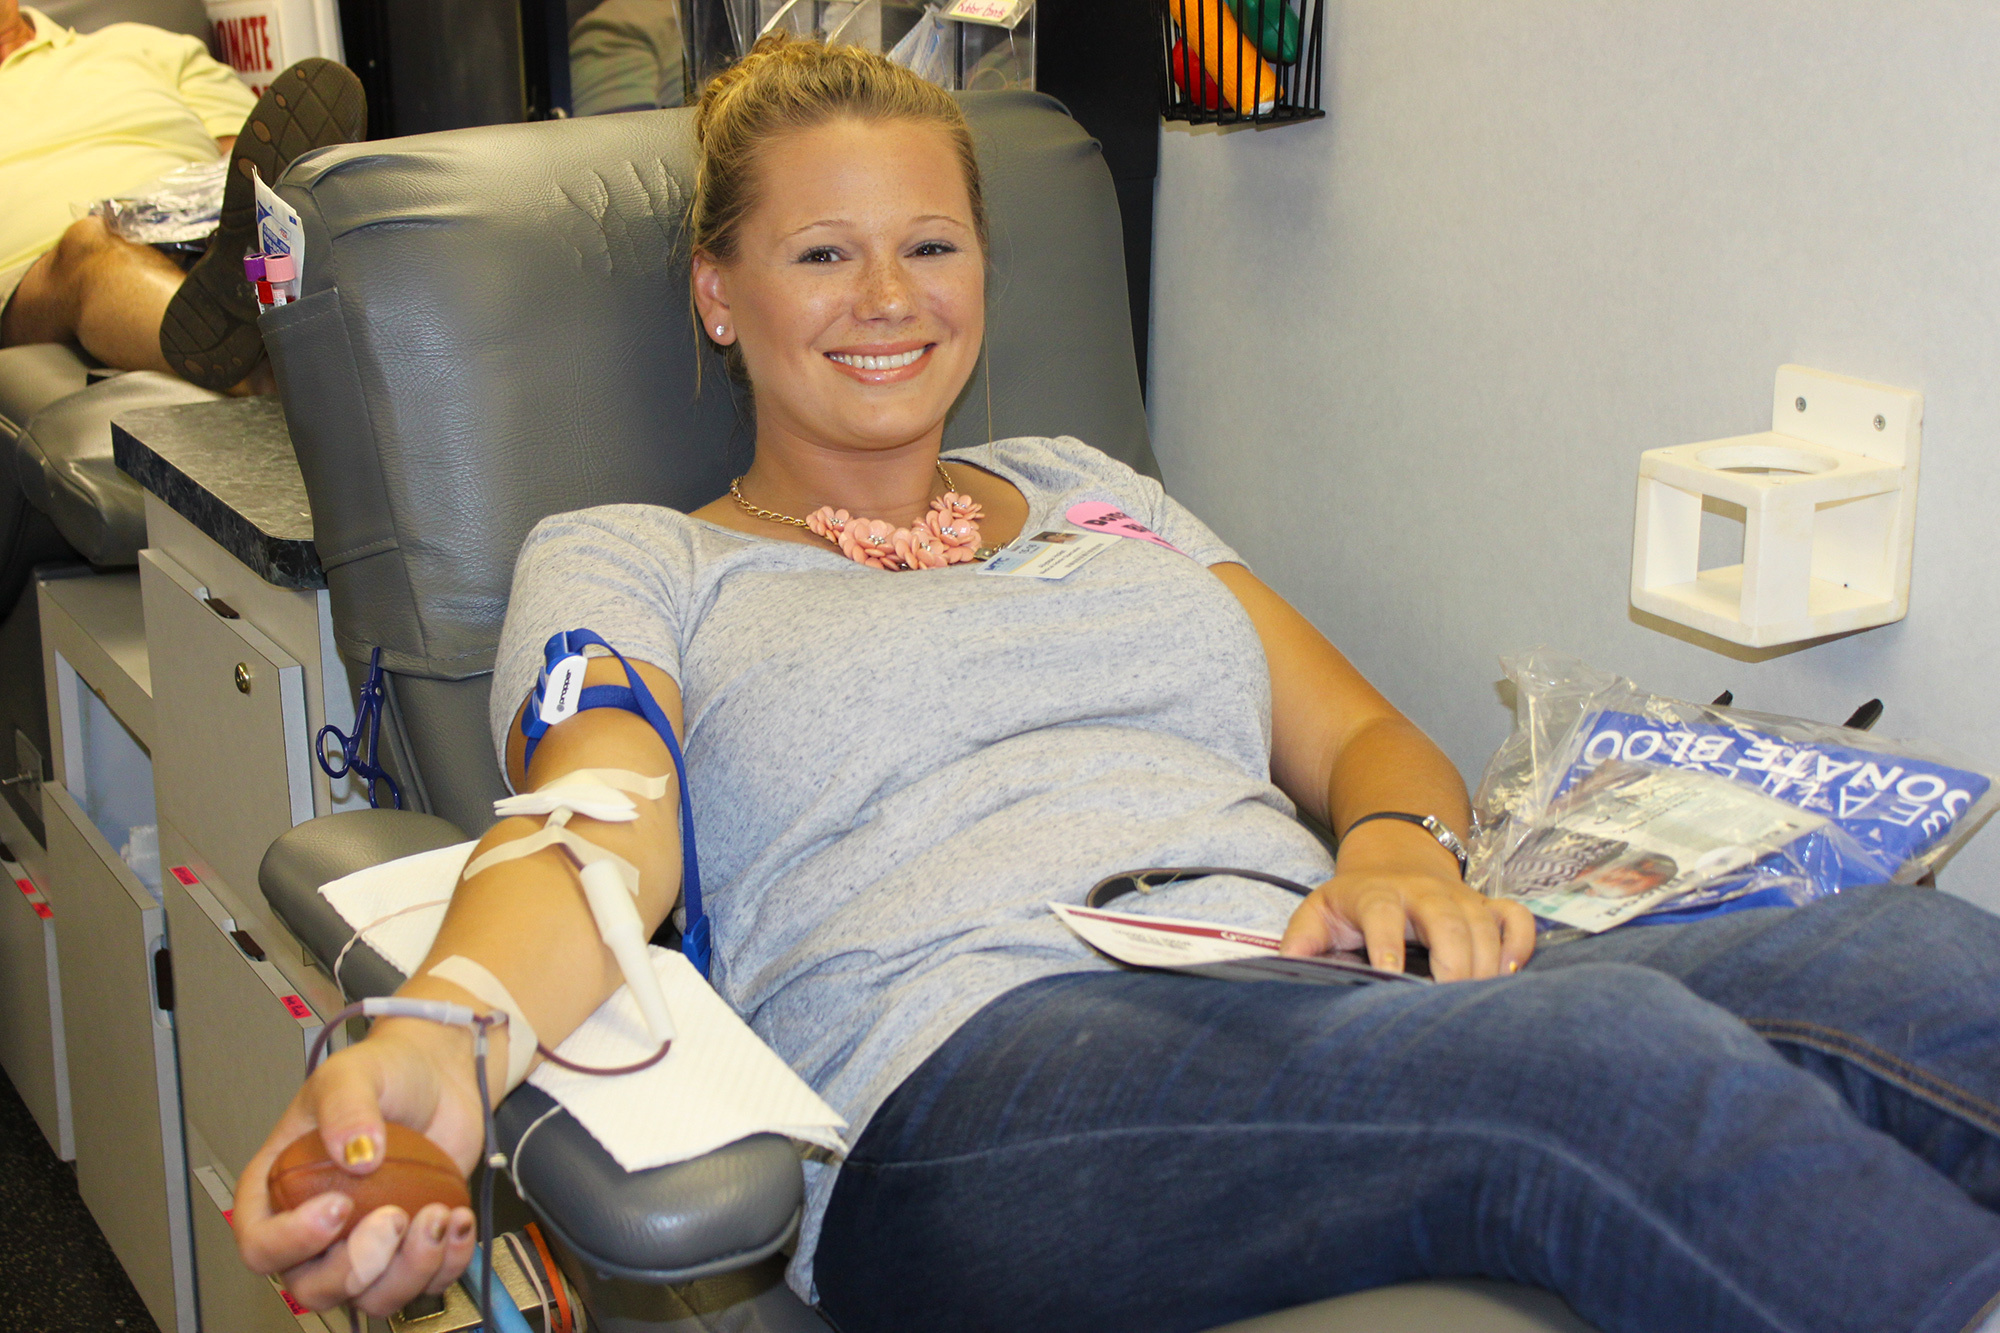 Alyssa Holst was one of 90 donors to give blood recently at Manatee Technical College.